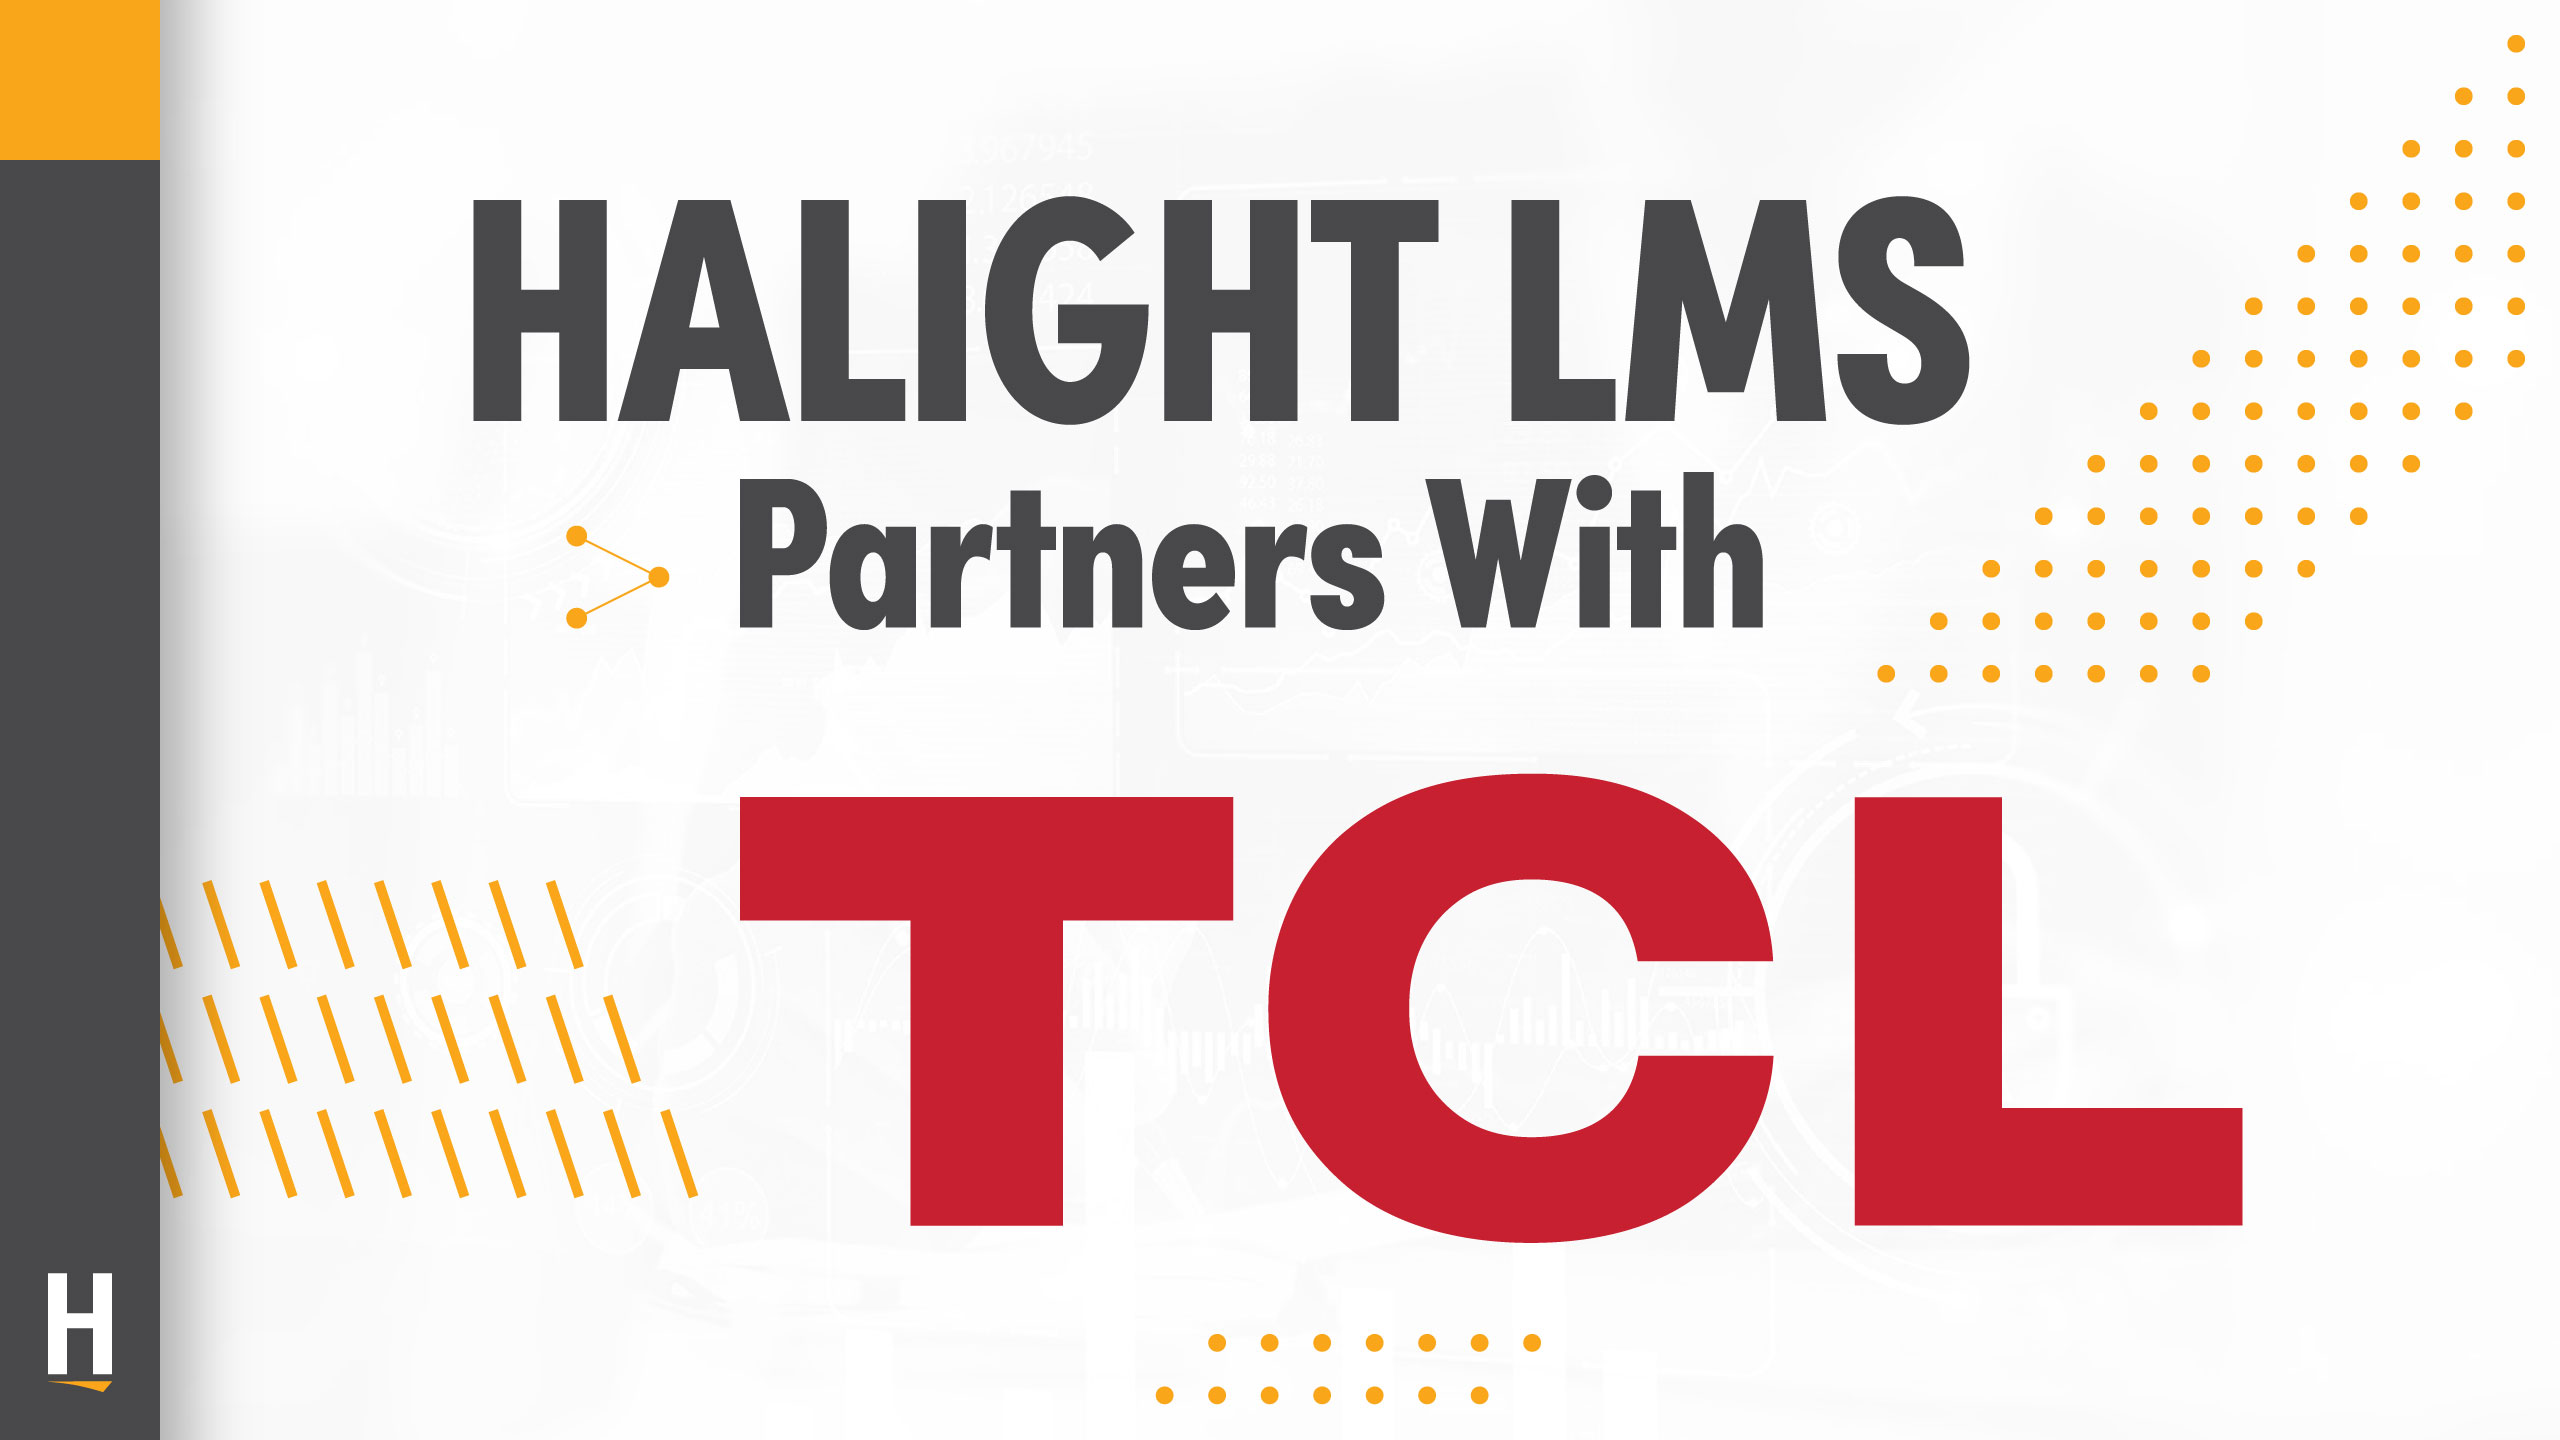 HALIGHT LMS Partners With TCL